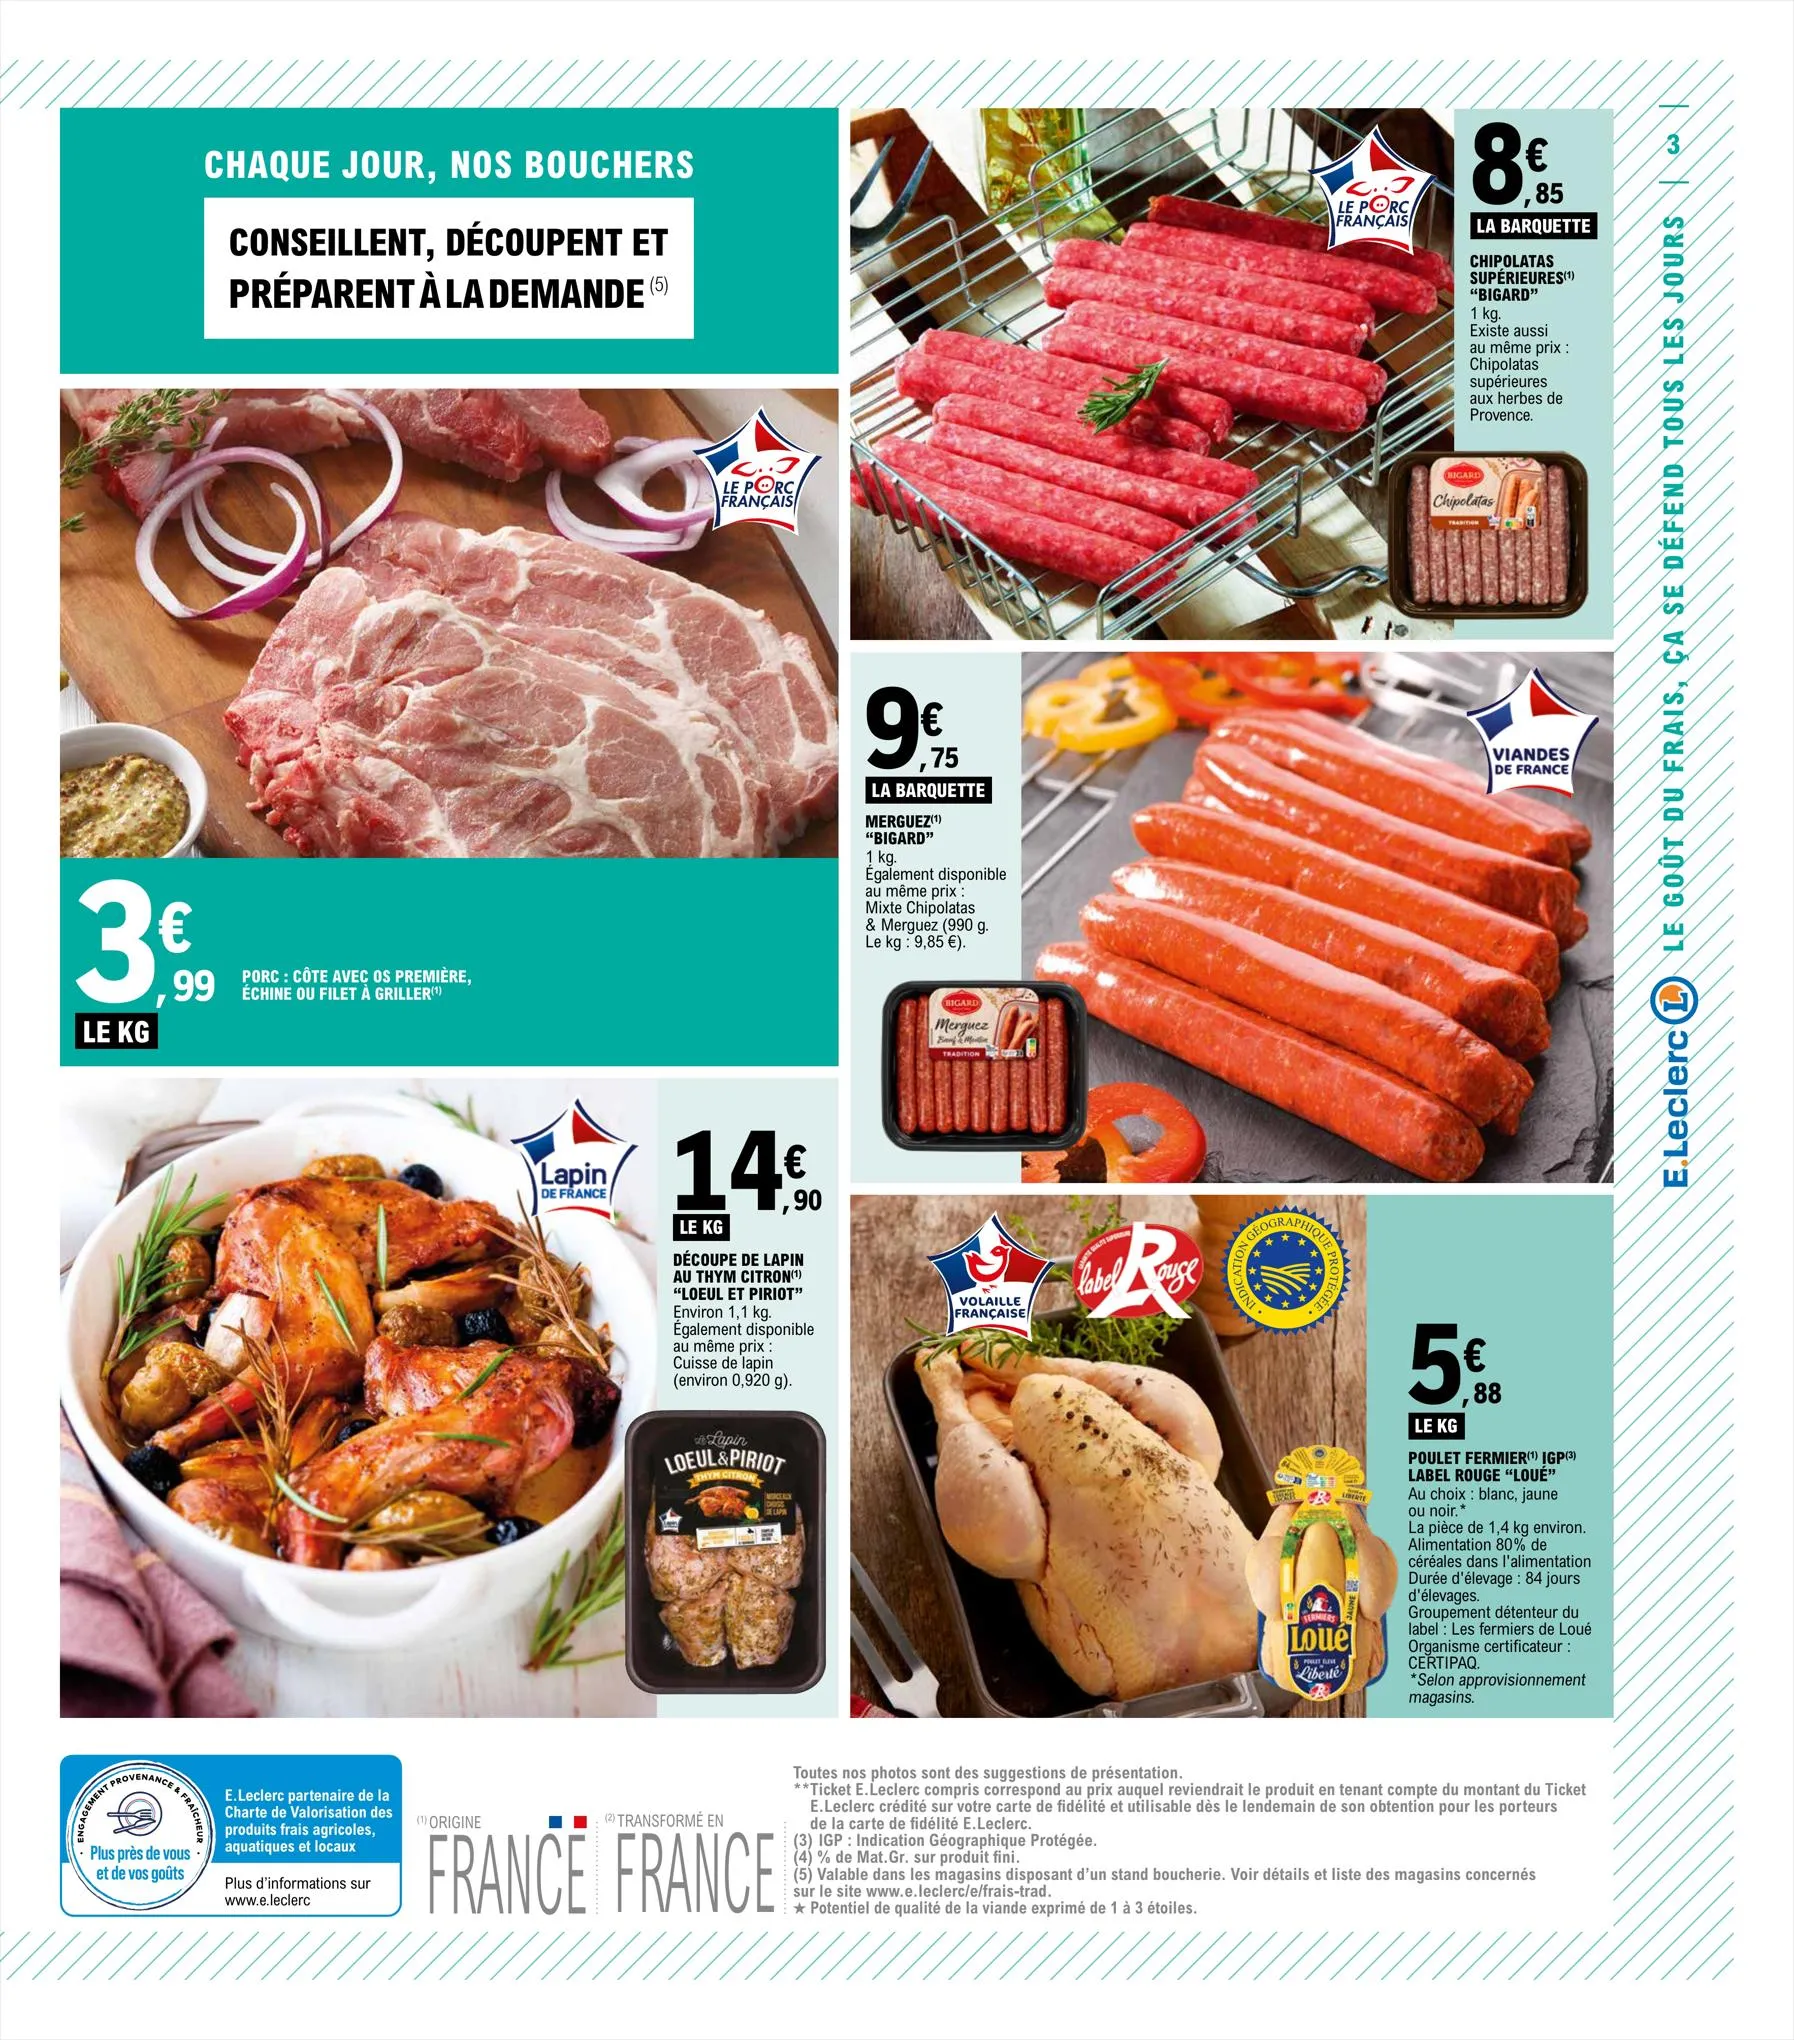 Catalogue Relance Alimentaire 10 - Mixte, page 00003